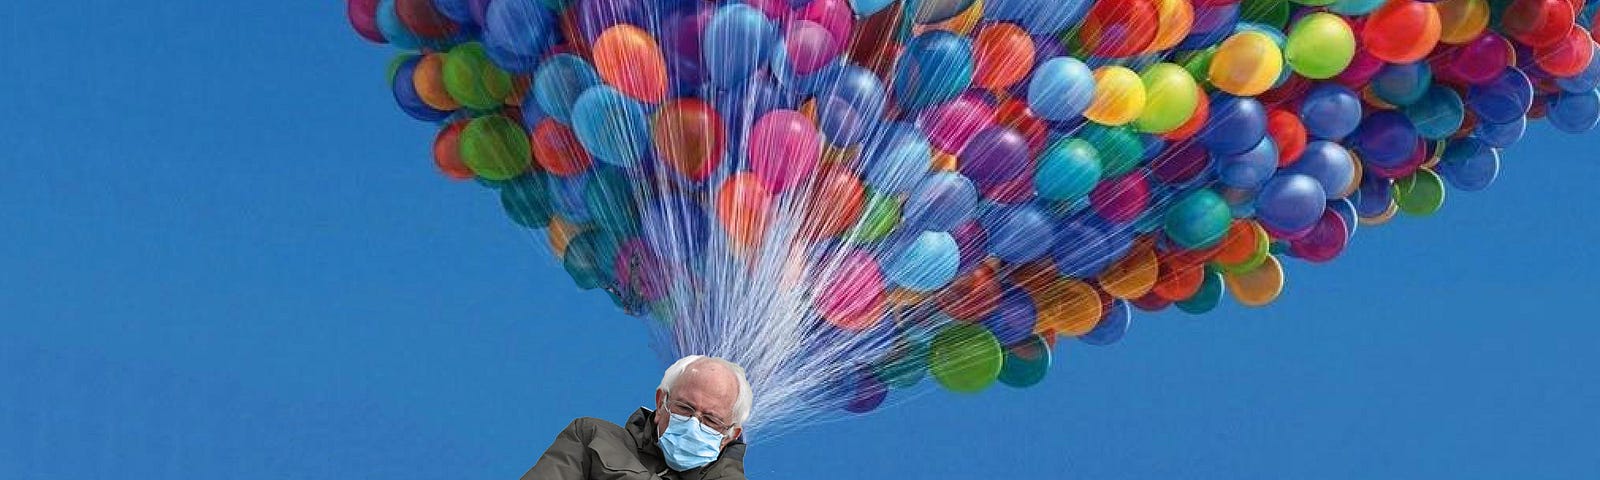 Bernie Sanders sits in his mittens and face mask meme image, being carried away by millions of balloons from the movie “Up”.